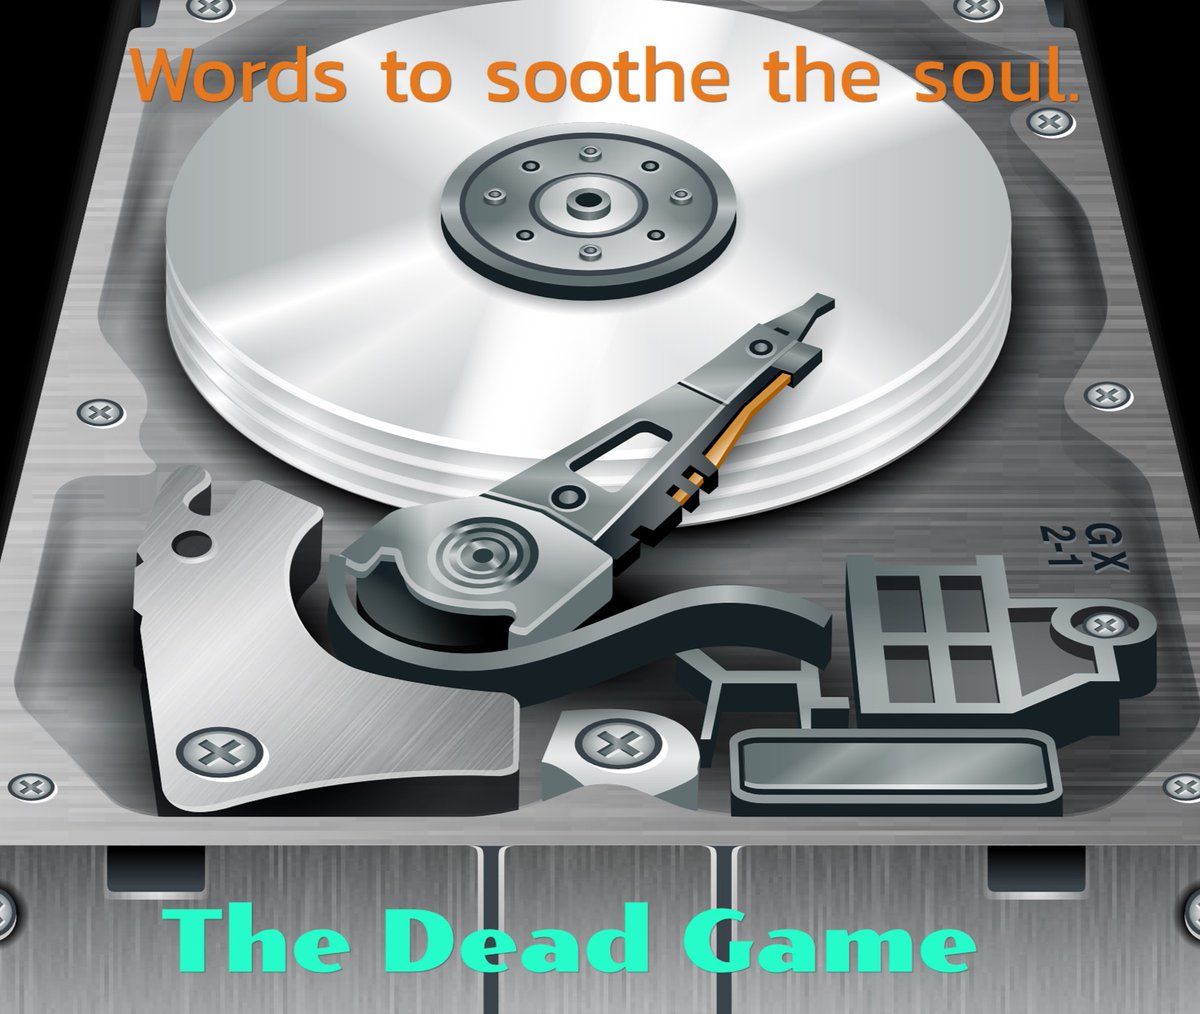 Sing me a love song.
Rhyme me a sad tale.
The woe of heartbroken lovers,
Their tinny cries take to the air.
The needle rides the grooves.
Round in a circle, it goes.

THE DEAD GAME

amzn.to/2nkhyHU

#RomanceNovel #bookstweet  #bookspotlight